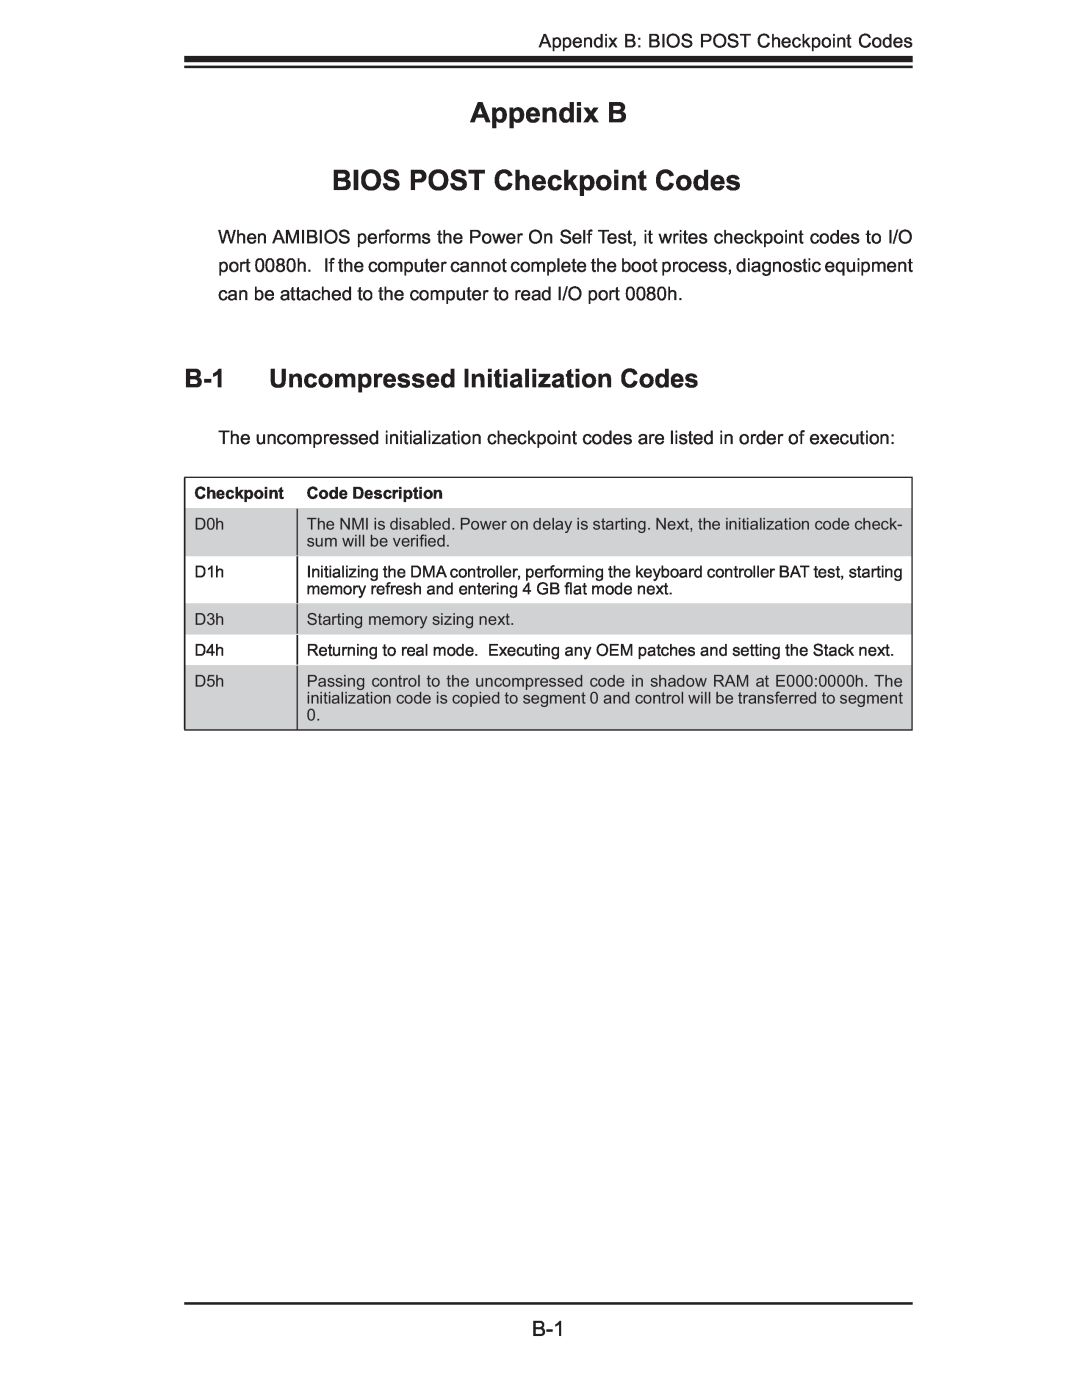 SUPER MICRO Computer AS1011M-T2 user manual Appendix B BIOS POST Checkpoint Codes, B-1 Uncompressed Initialization Codes 